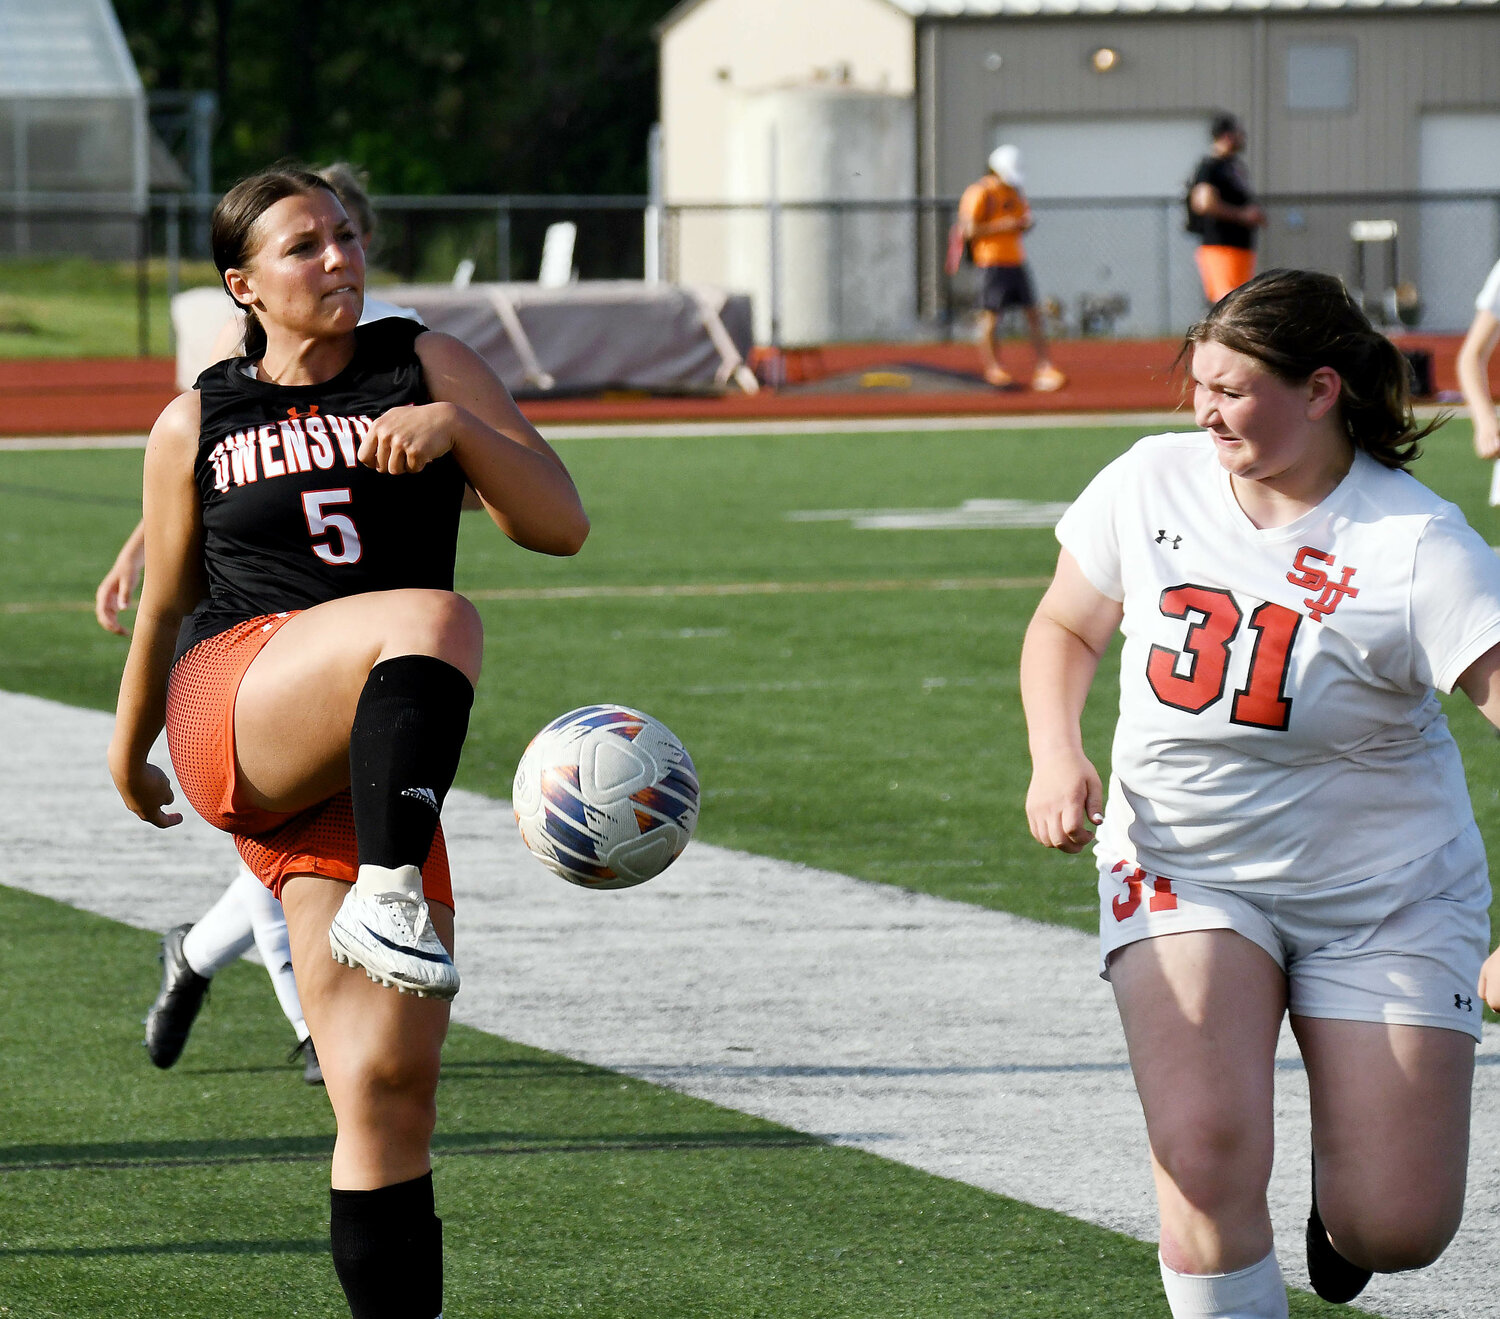 Drew Copeland (left) sends the ball up field during Owensville Dutchgirl soccer senior night action Monday at Dutchmen Field while St. James’ Baylee Jones defends for the visiting Lady Tigers. Copeland was one of eight seniors recognized for their contributions to the Dutchgirl soccer program prior to their 4-0 victory over St. James.